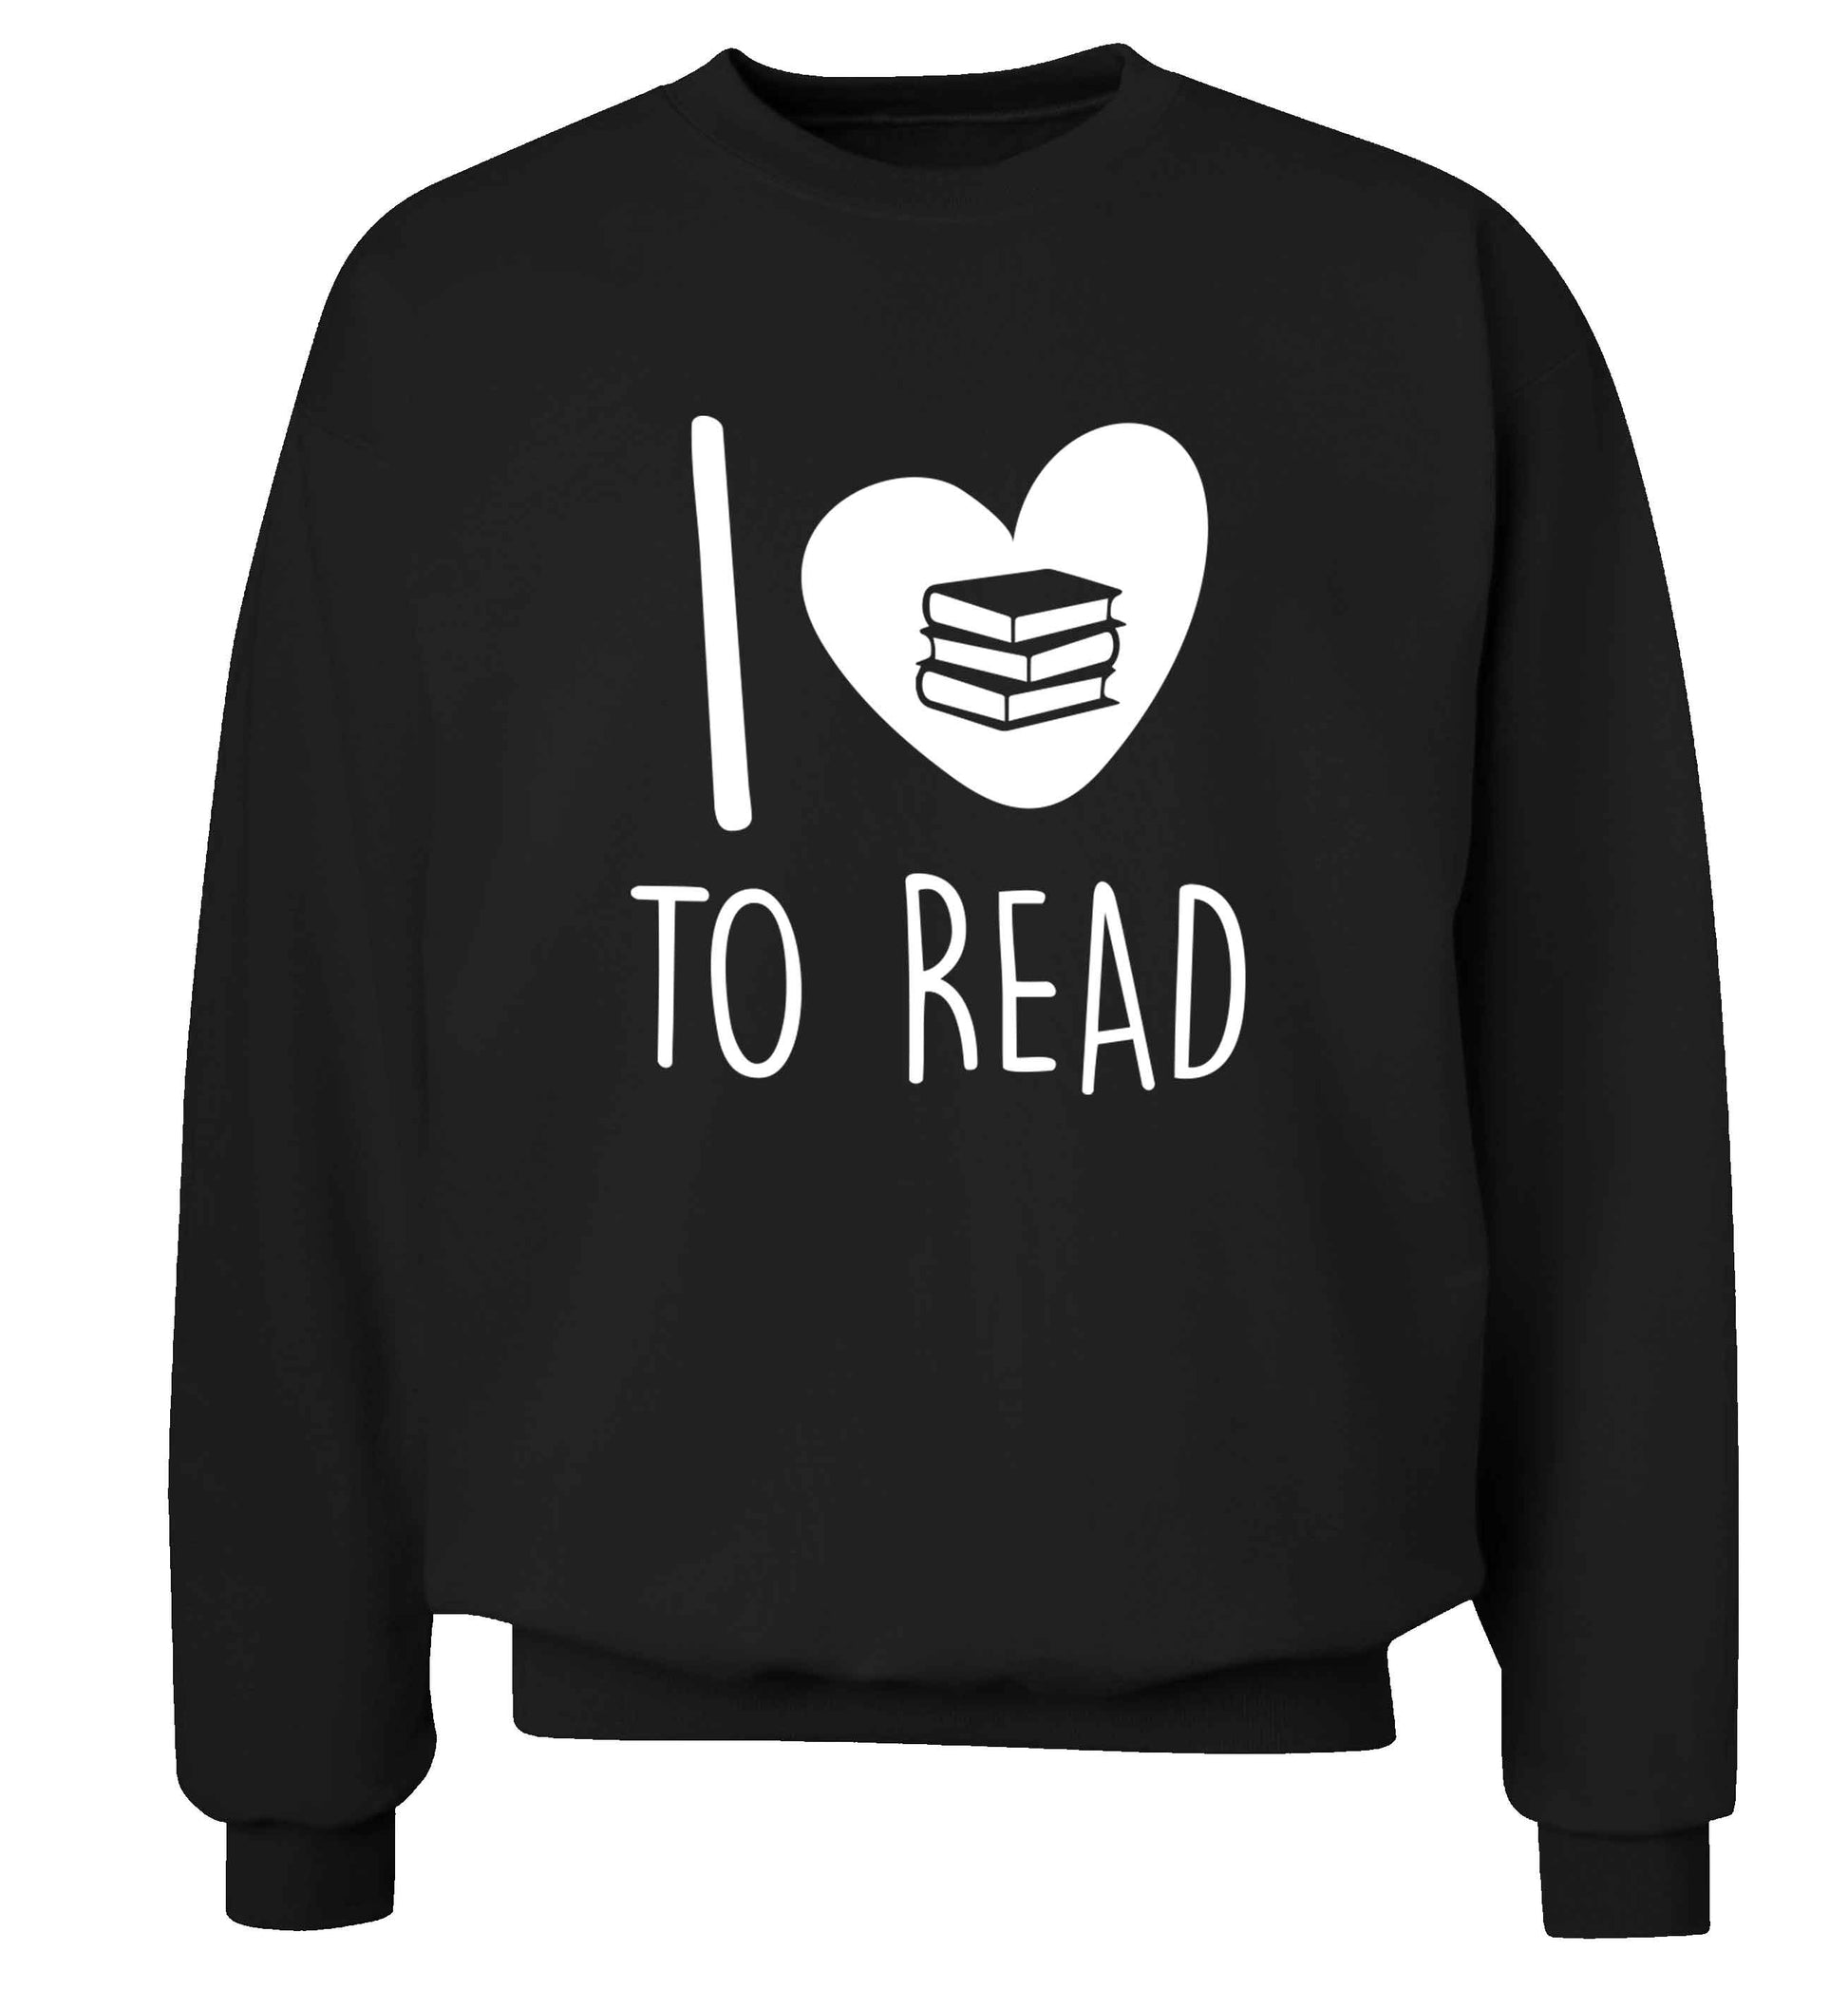 I love to read Adult's unisex black Sweater 2XL